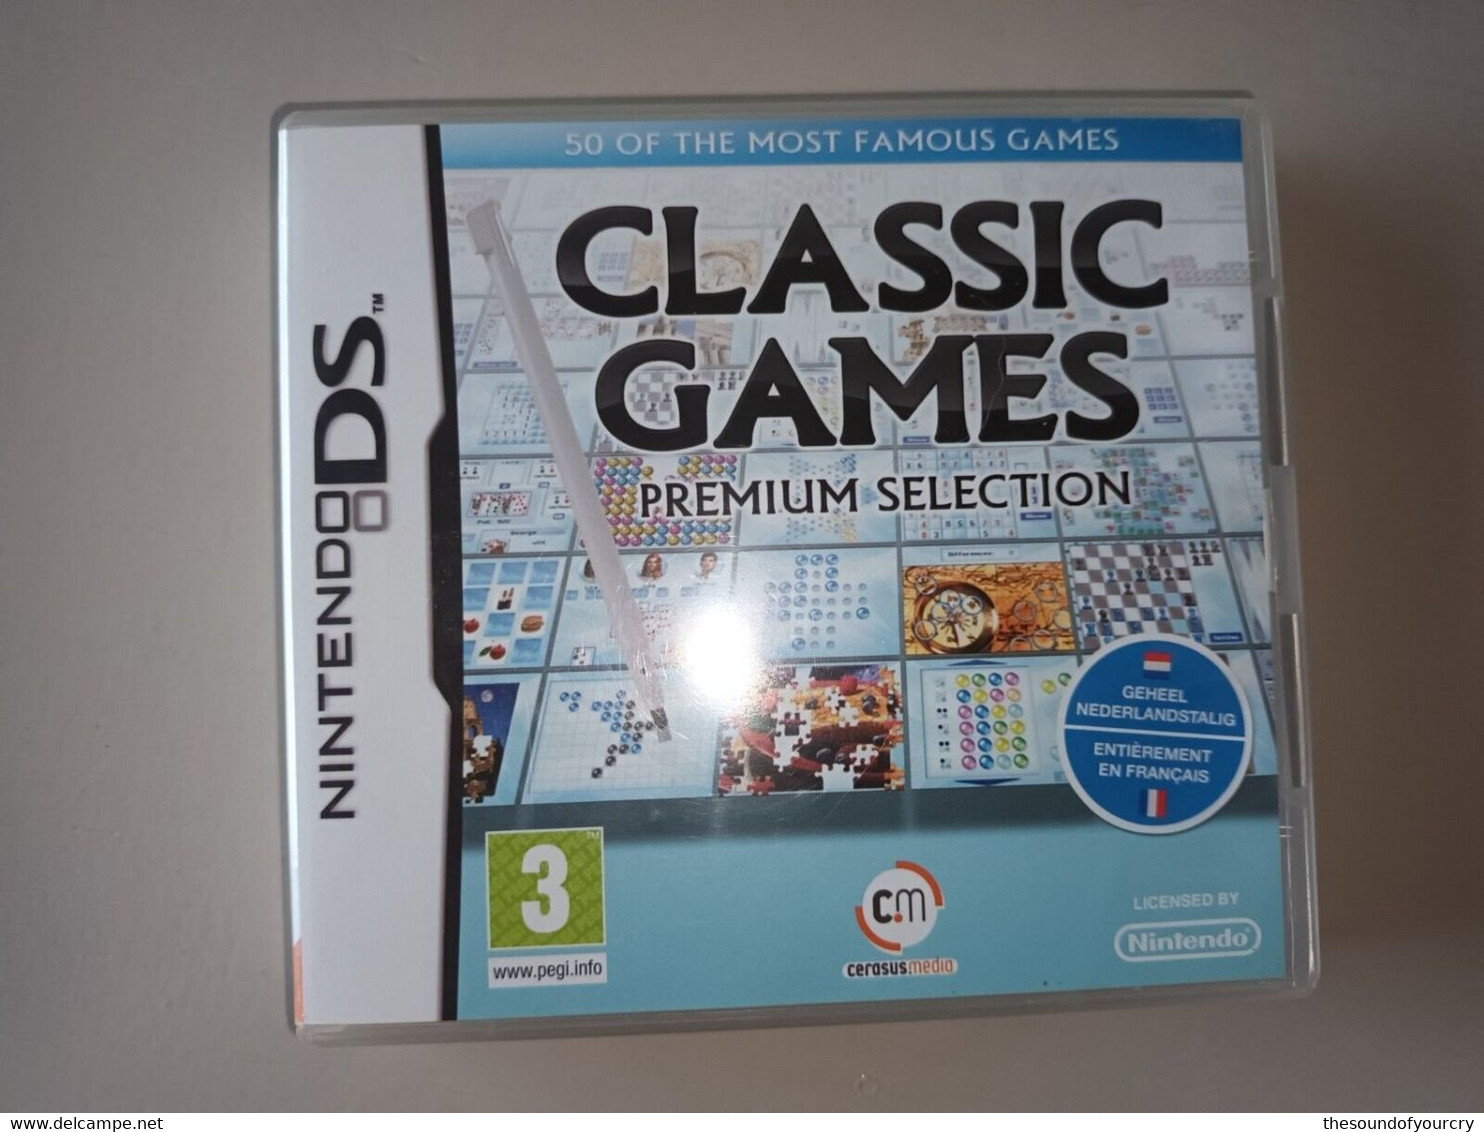 Game Nintendo Ds Classic Games Premium Selection 50 In 1 Game - Nintendo DS